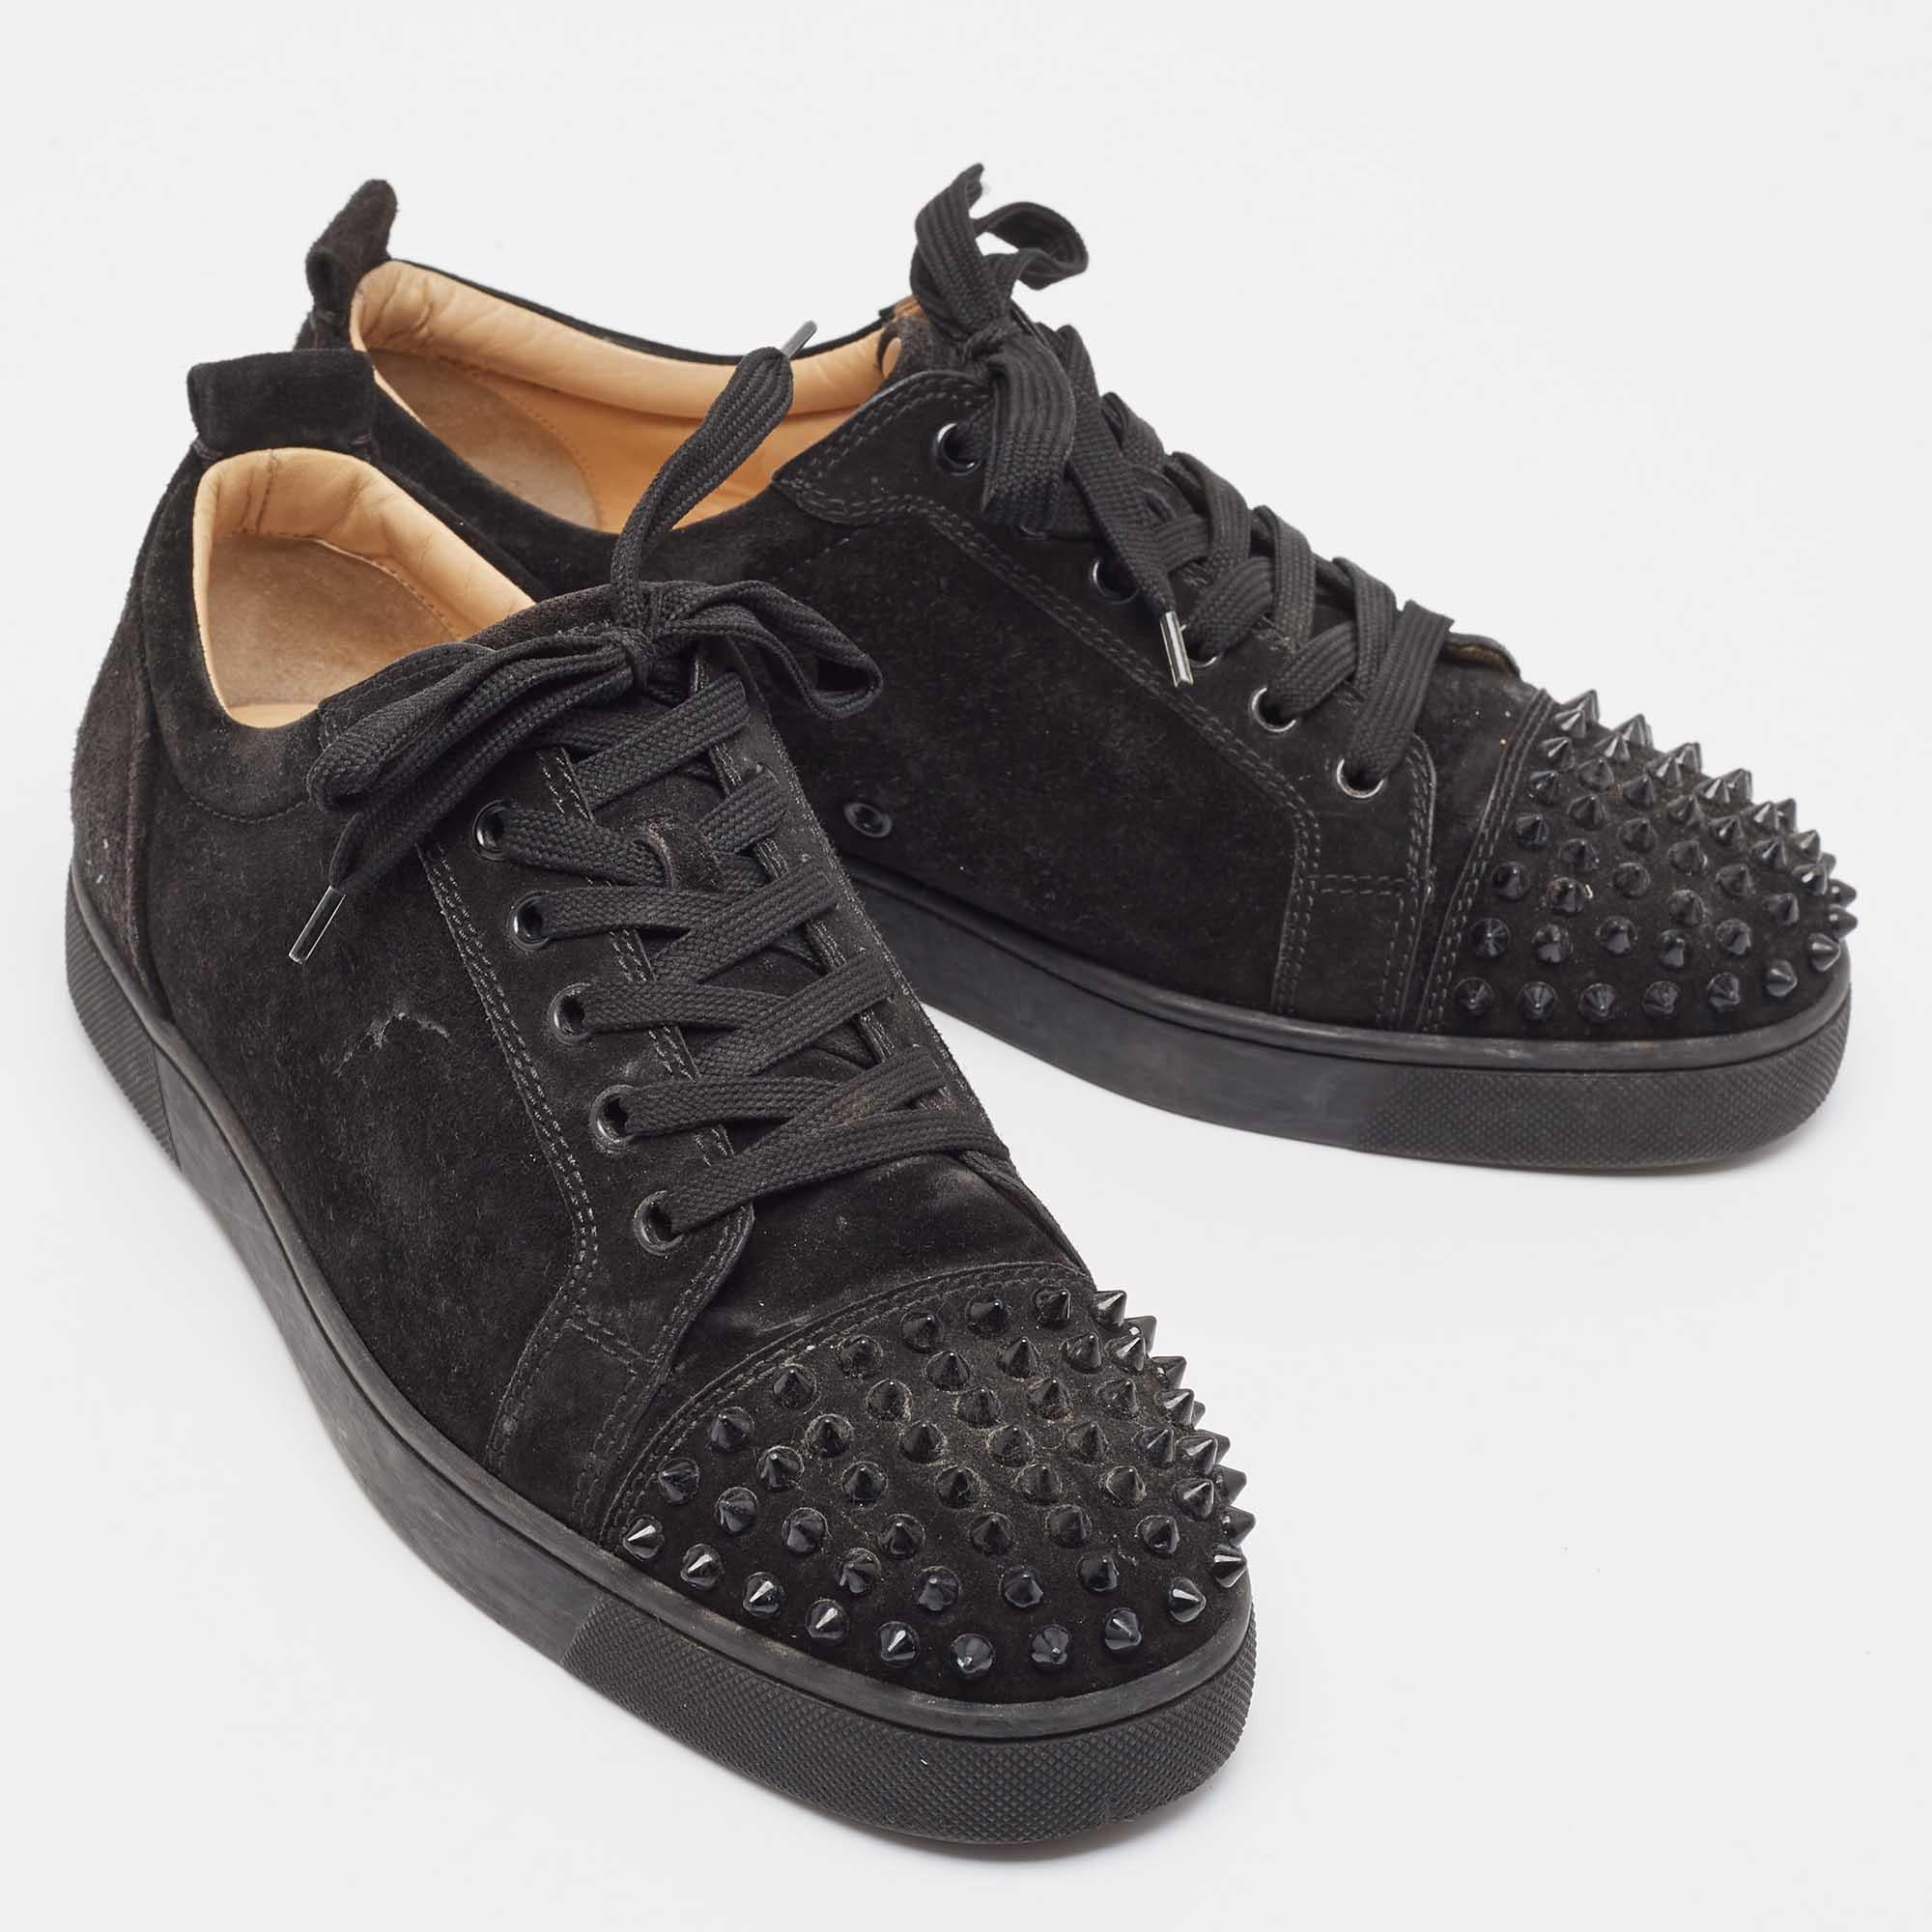 Christian Louboutin Black Suede Louise Spike Low Top Sneakers Size 43 In Fair Condition For Sale In Dubai, Al Qouz 2